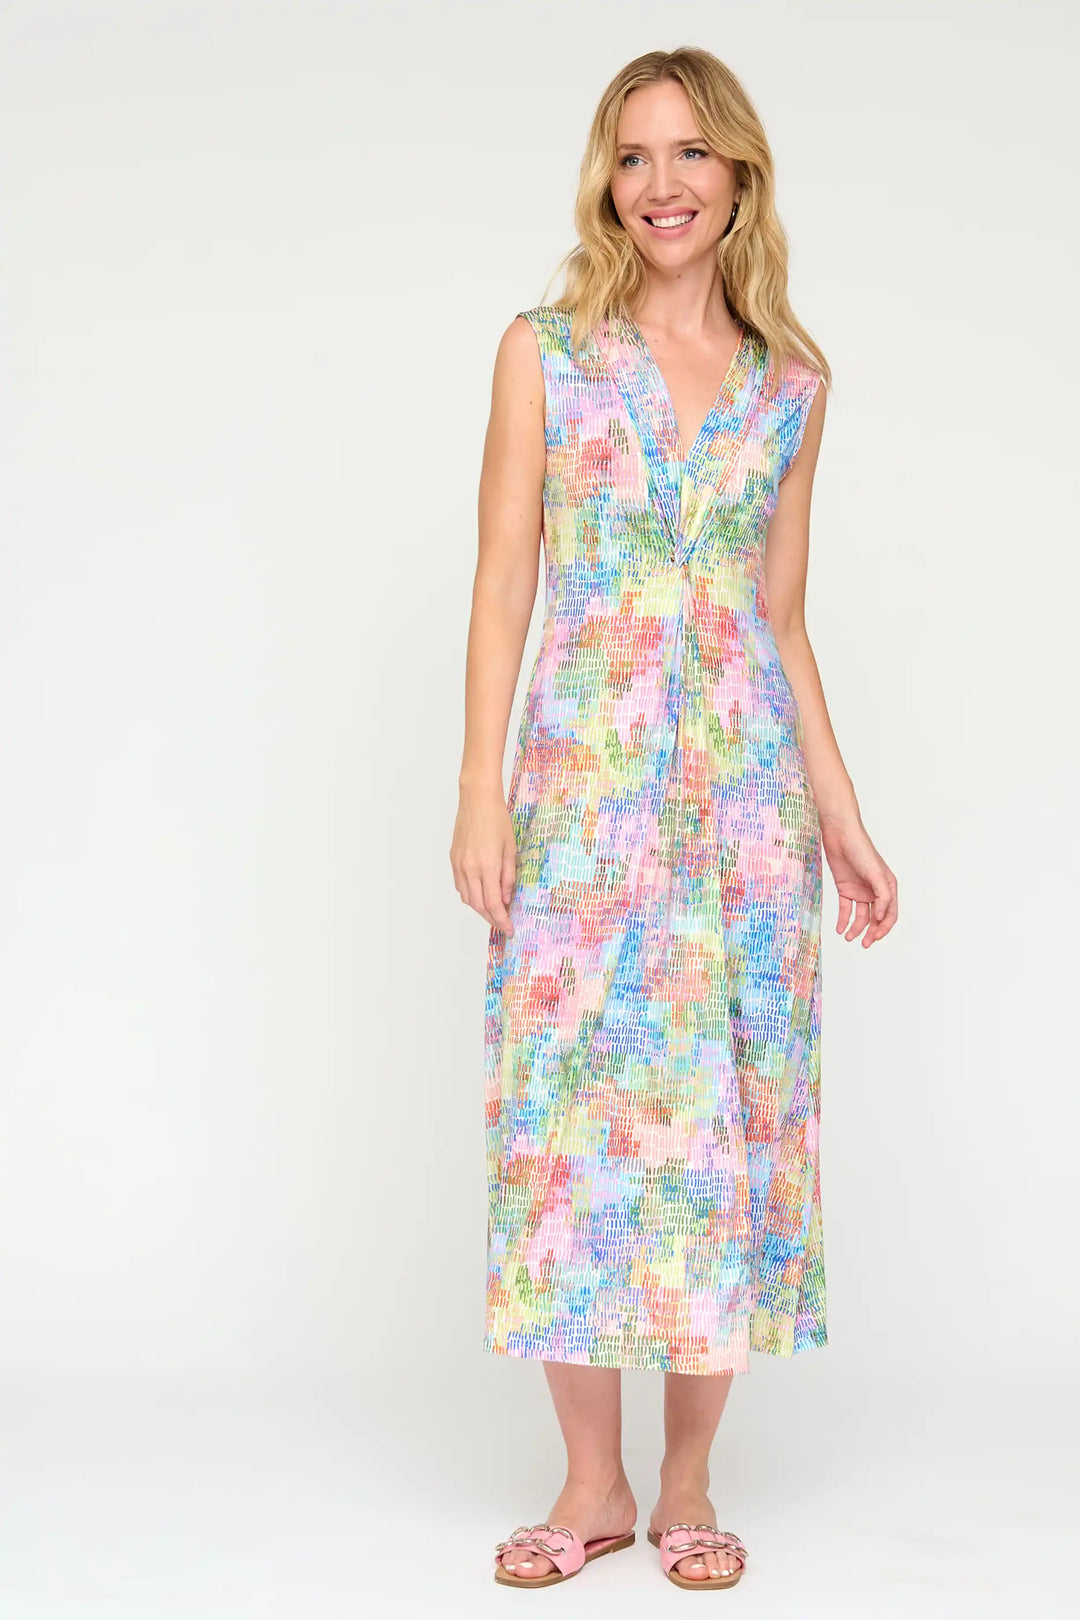 Model in the 'Veronica24' style midi dress, smiling, with a pastel-coloured abstract print, V-neckline, and a waist detail, paired with light pink sandals.